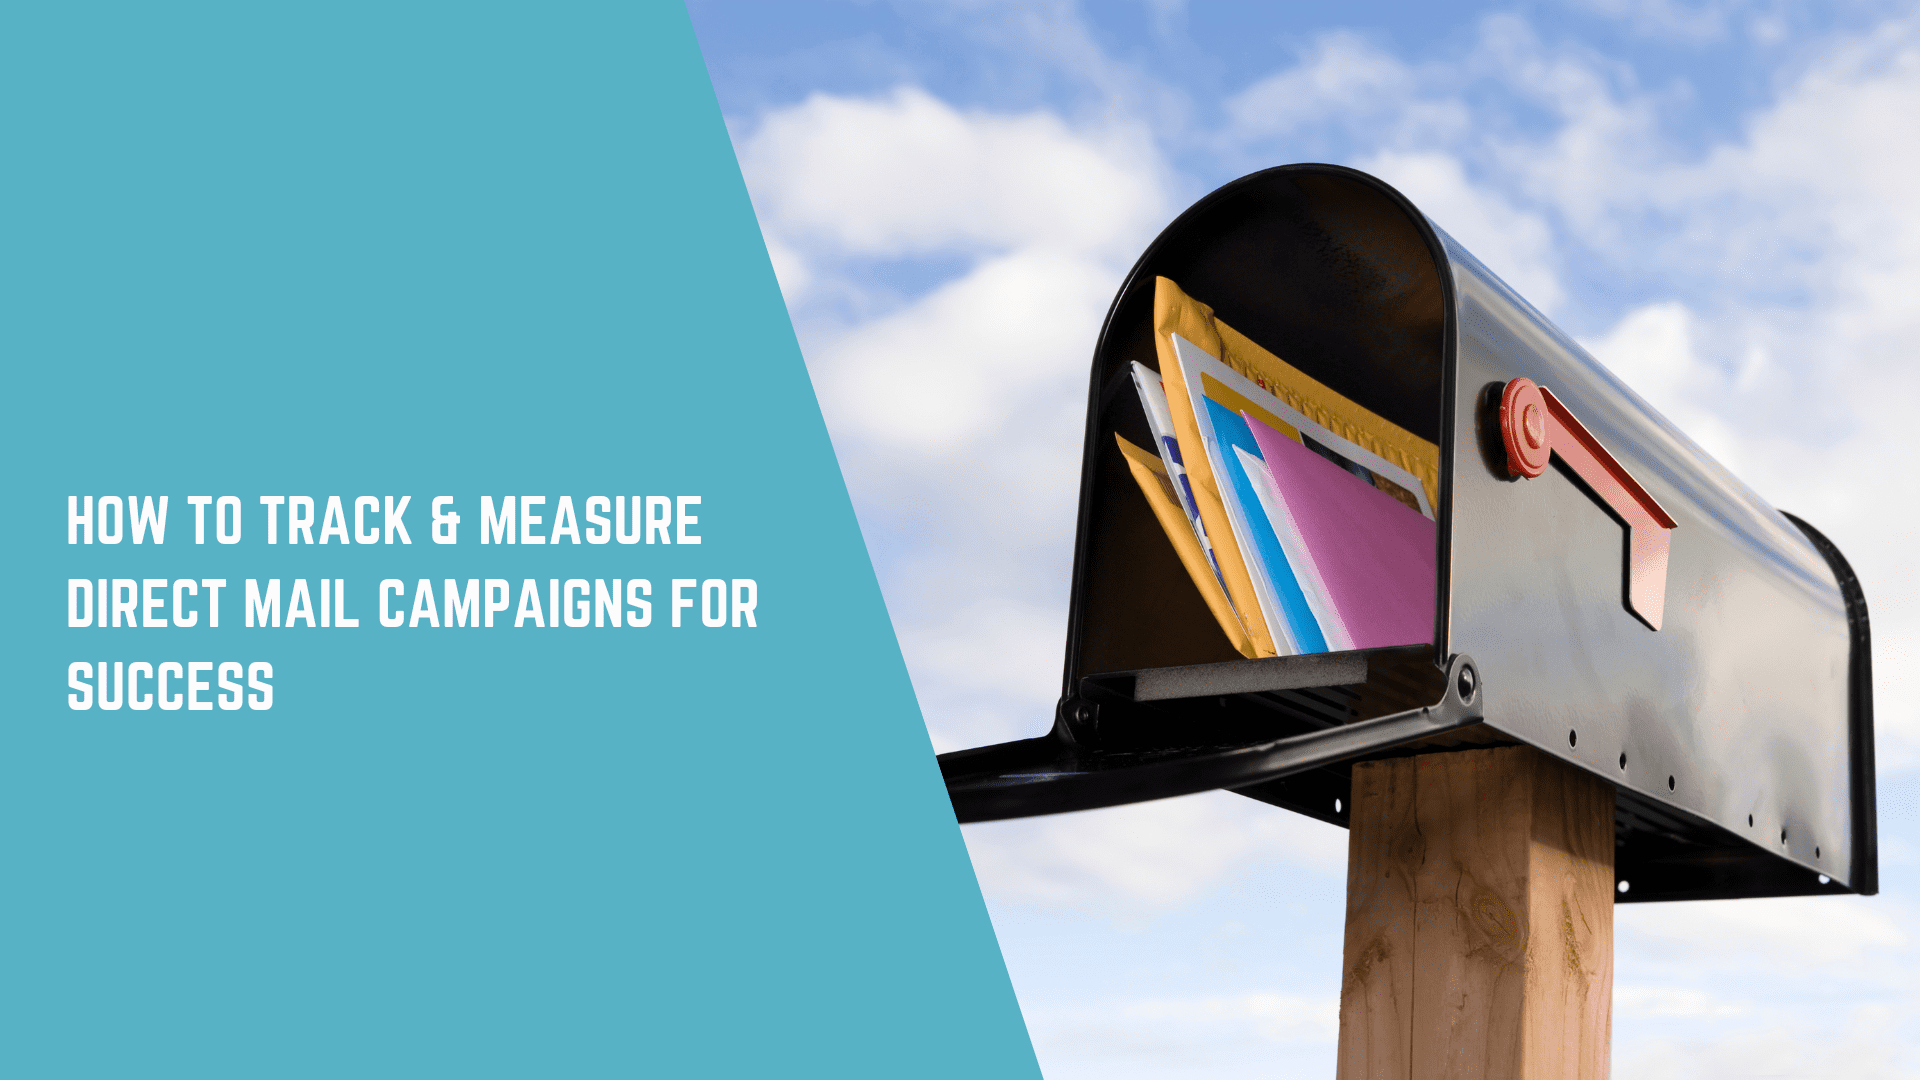 How to Track & Measure Direct Mail Campaigns For Success